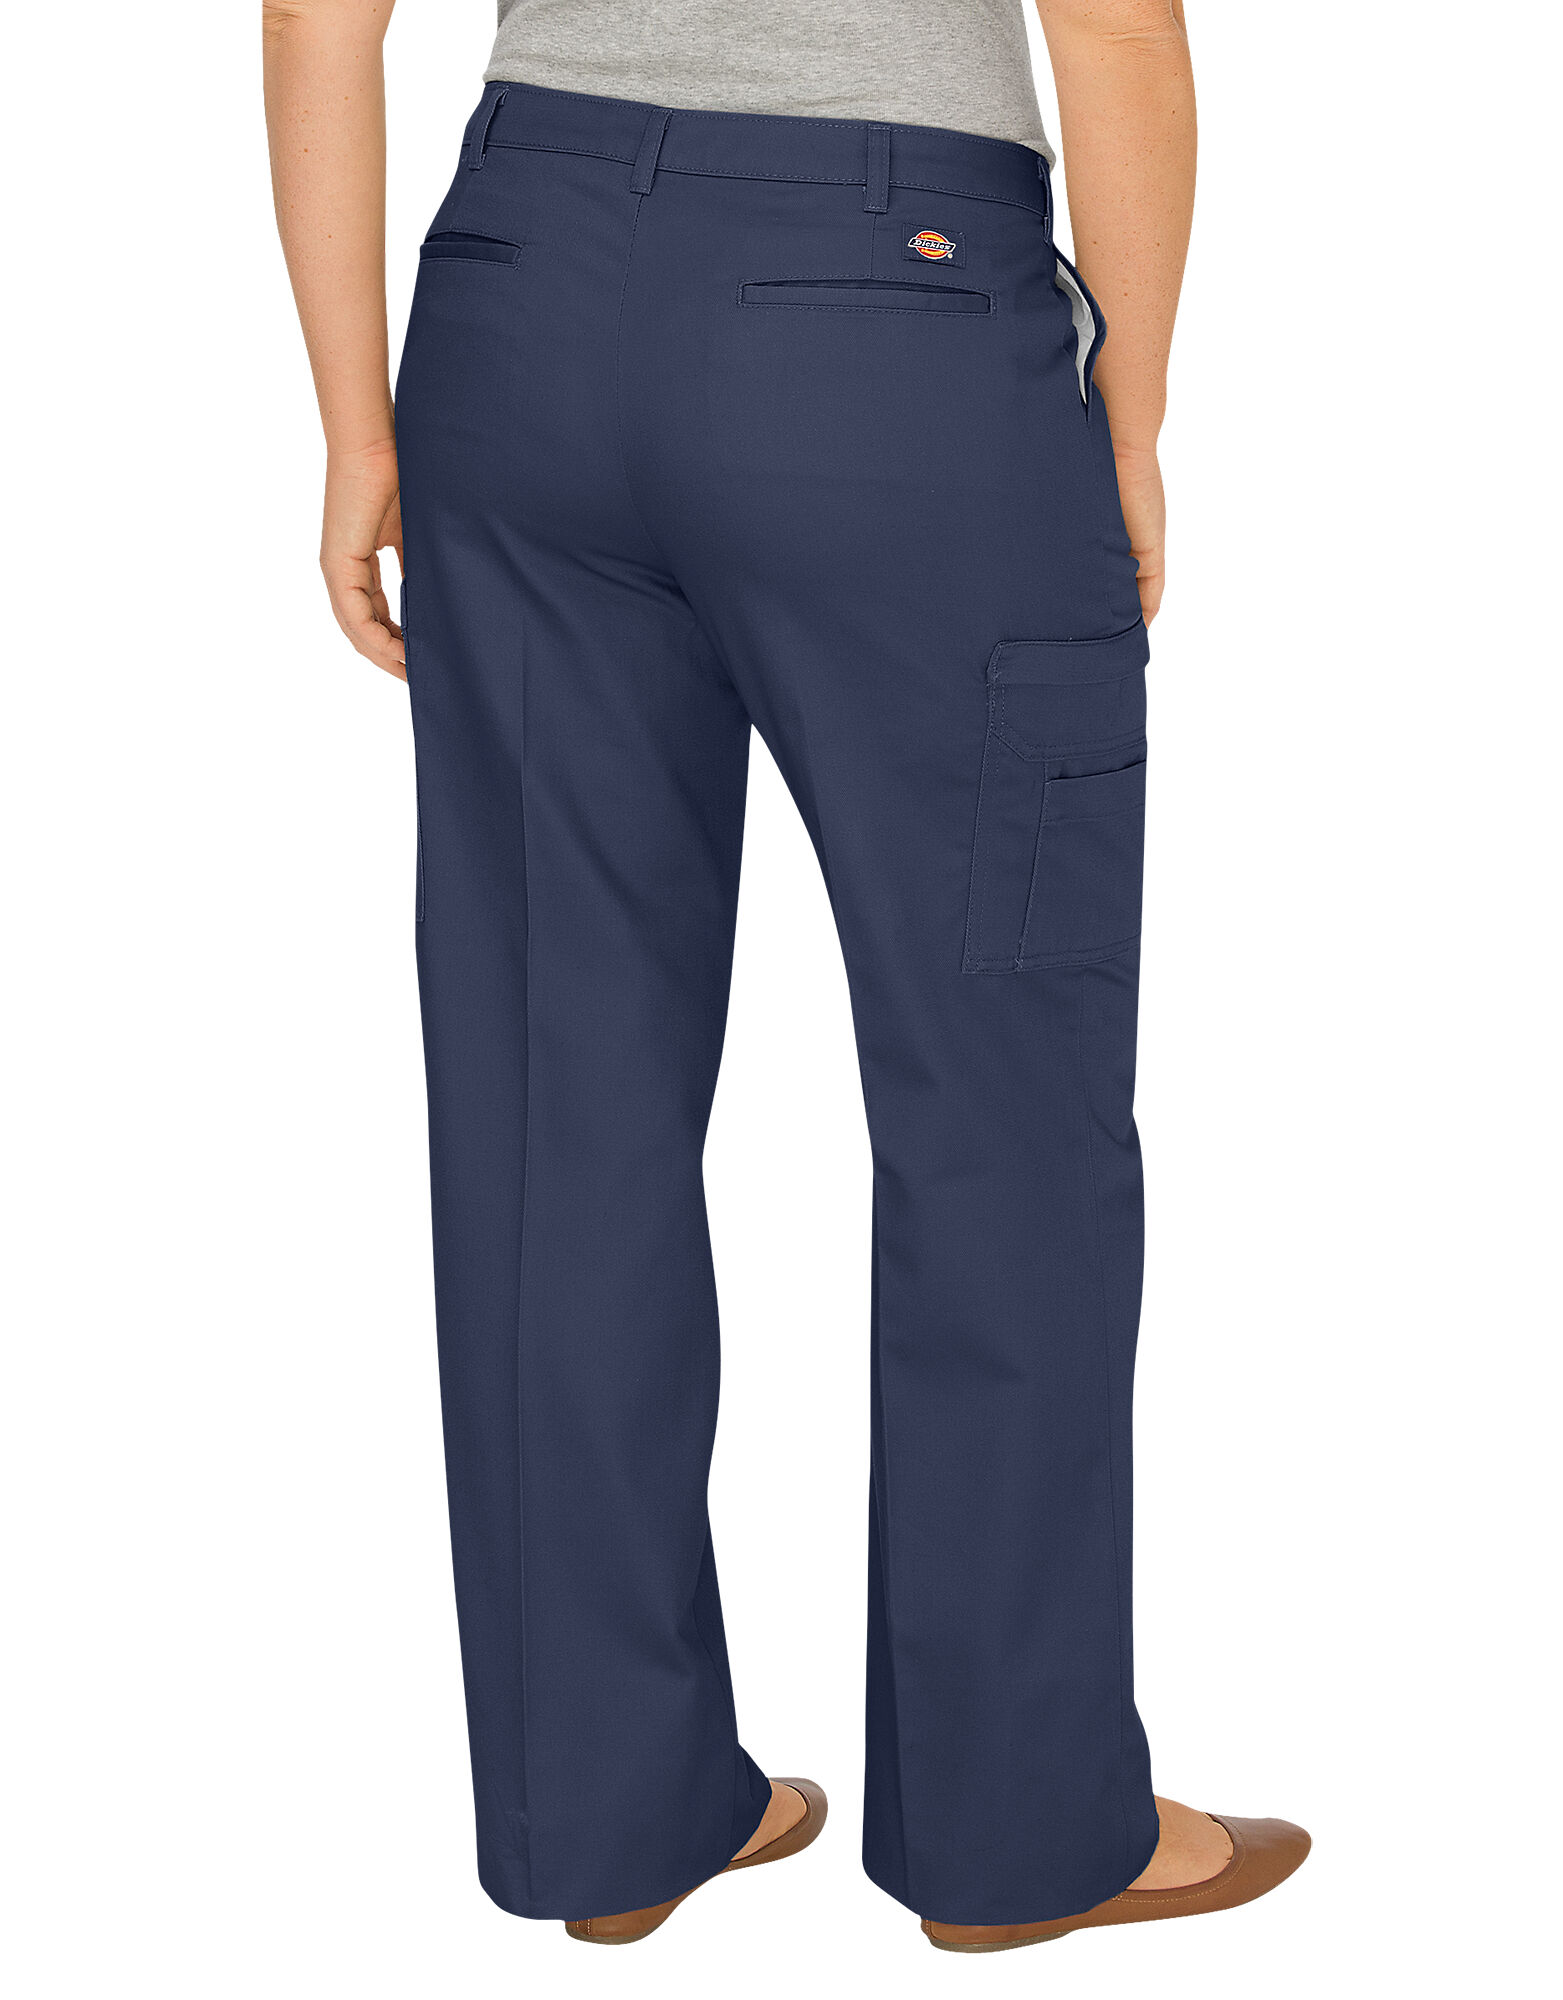 Relaxed Fit Straight Leg Cargo Pants 